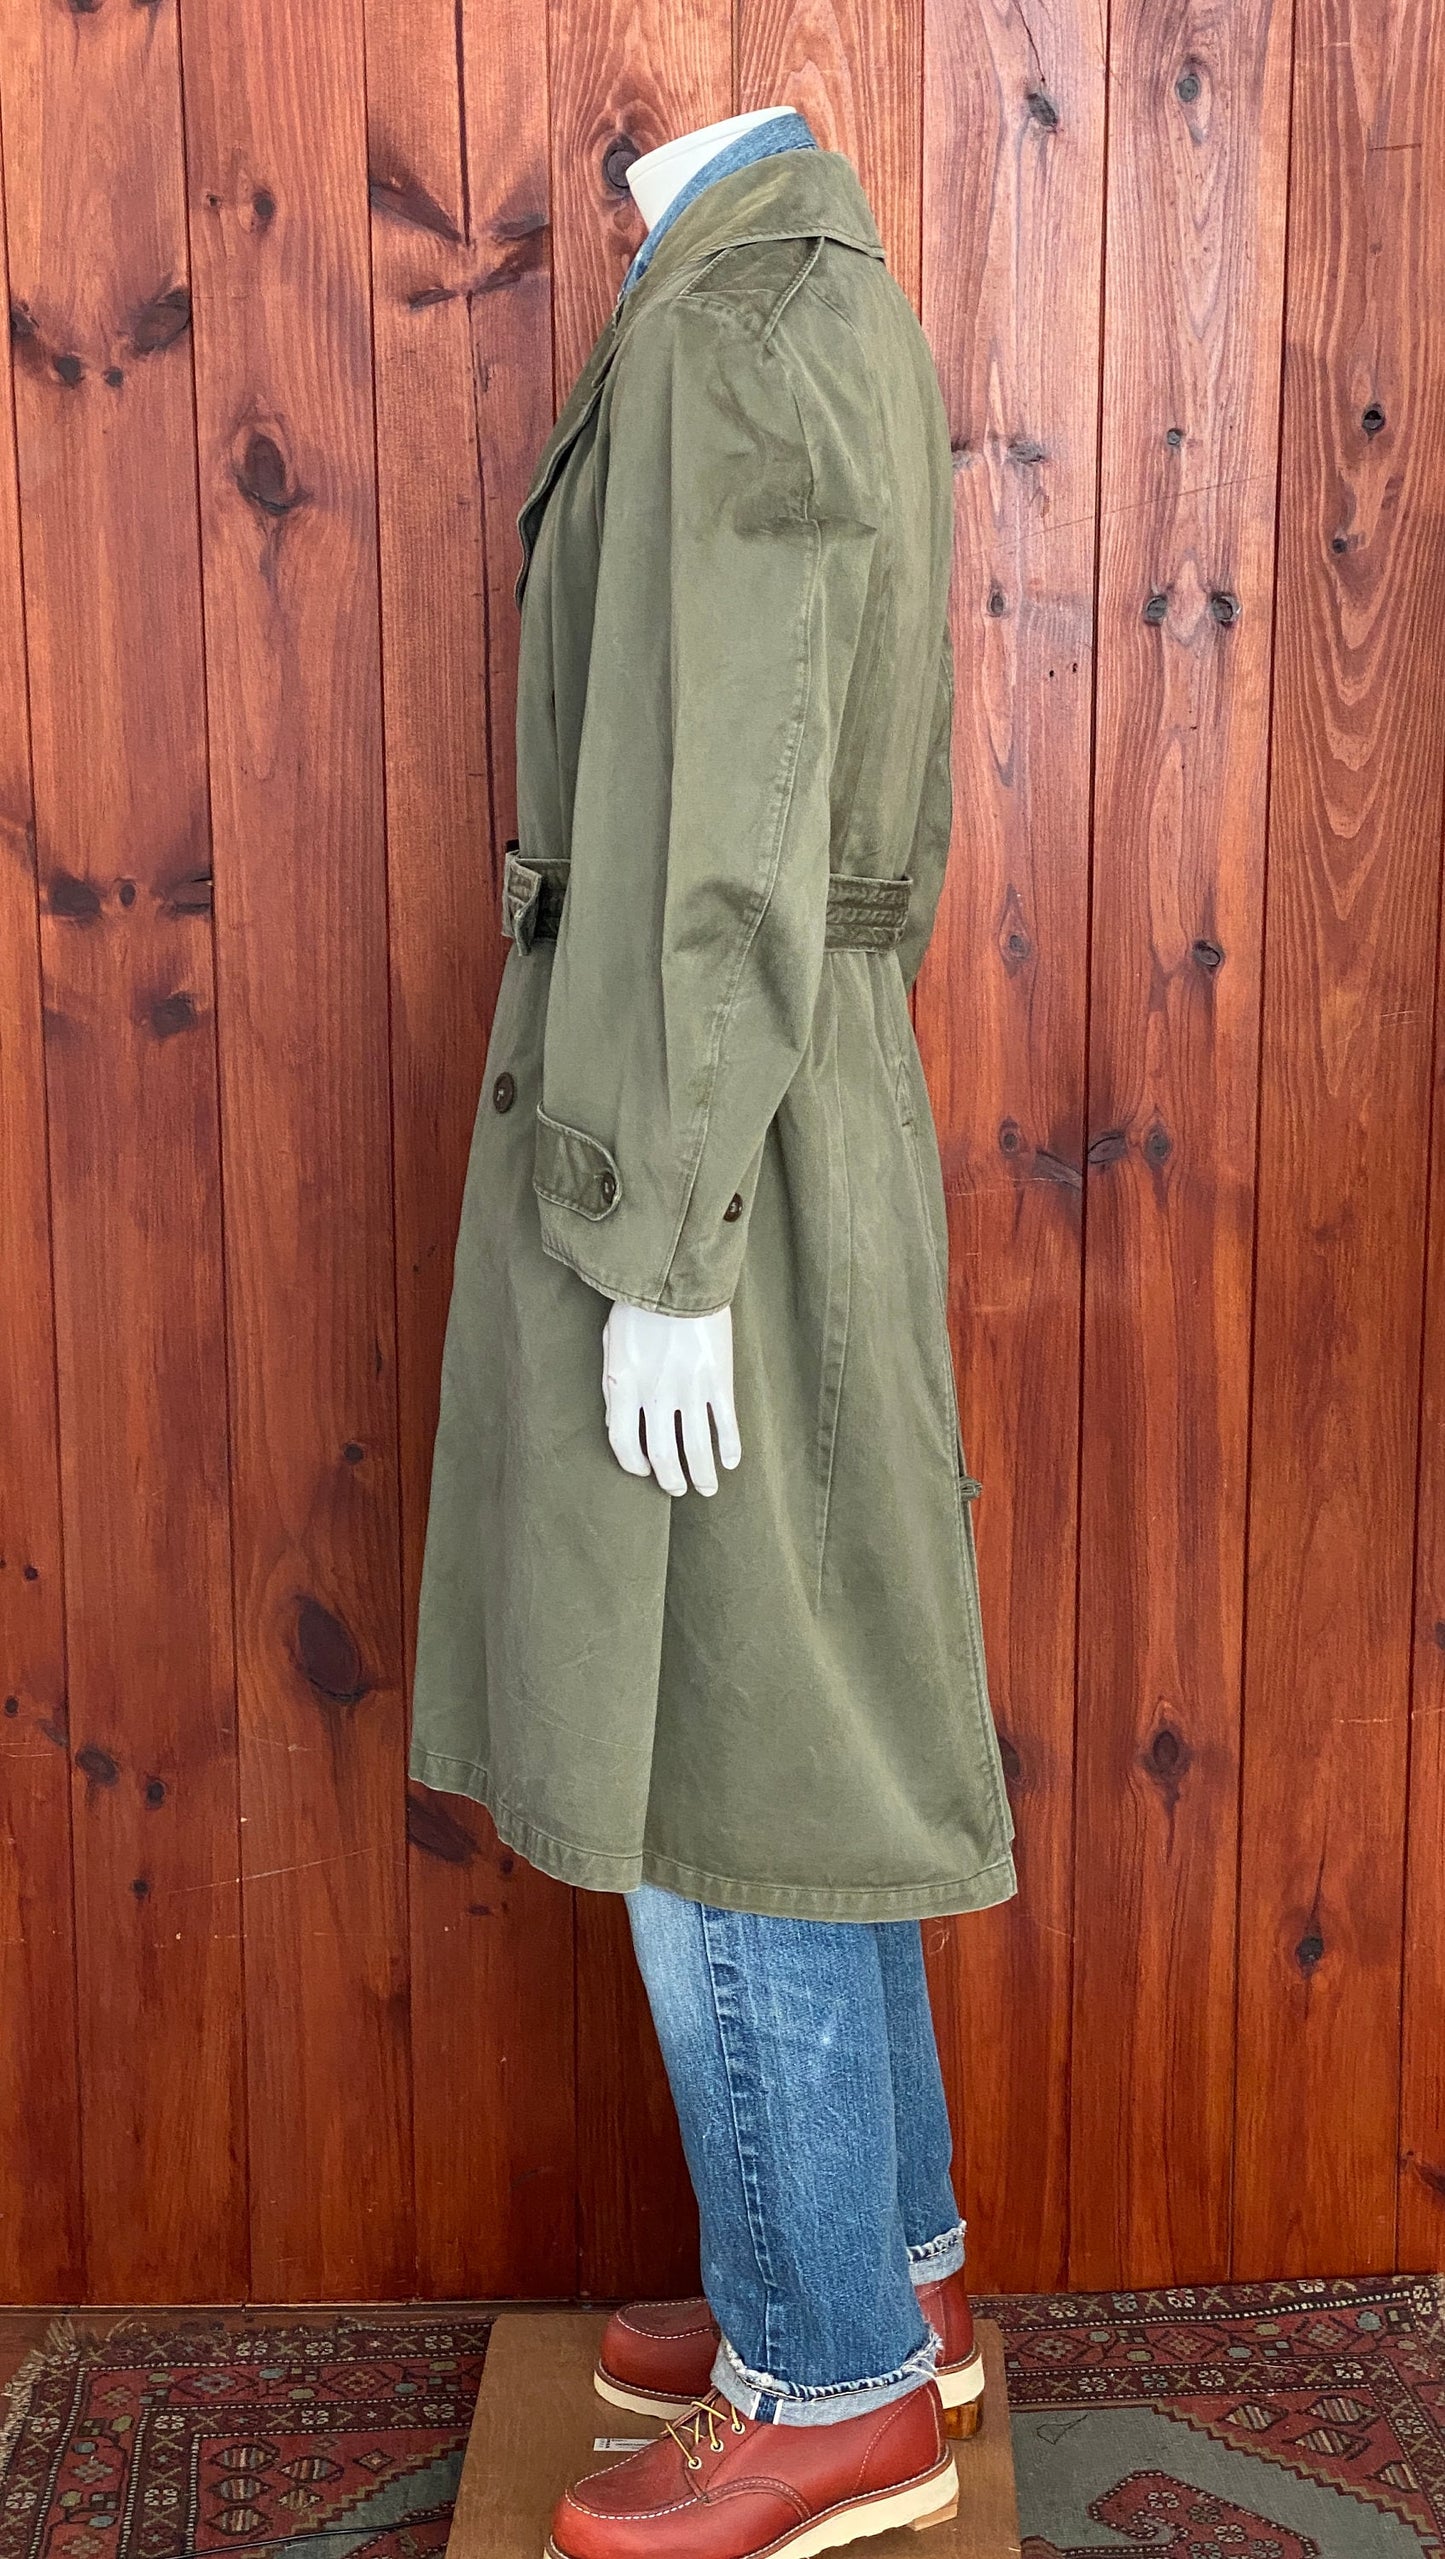 Original US Army 1950s Trench Coat: Authentic Military Vintage Apparel in Medium Regular Size. Embrace History and Style Today!